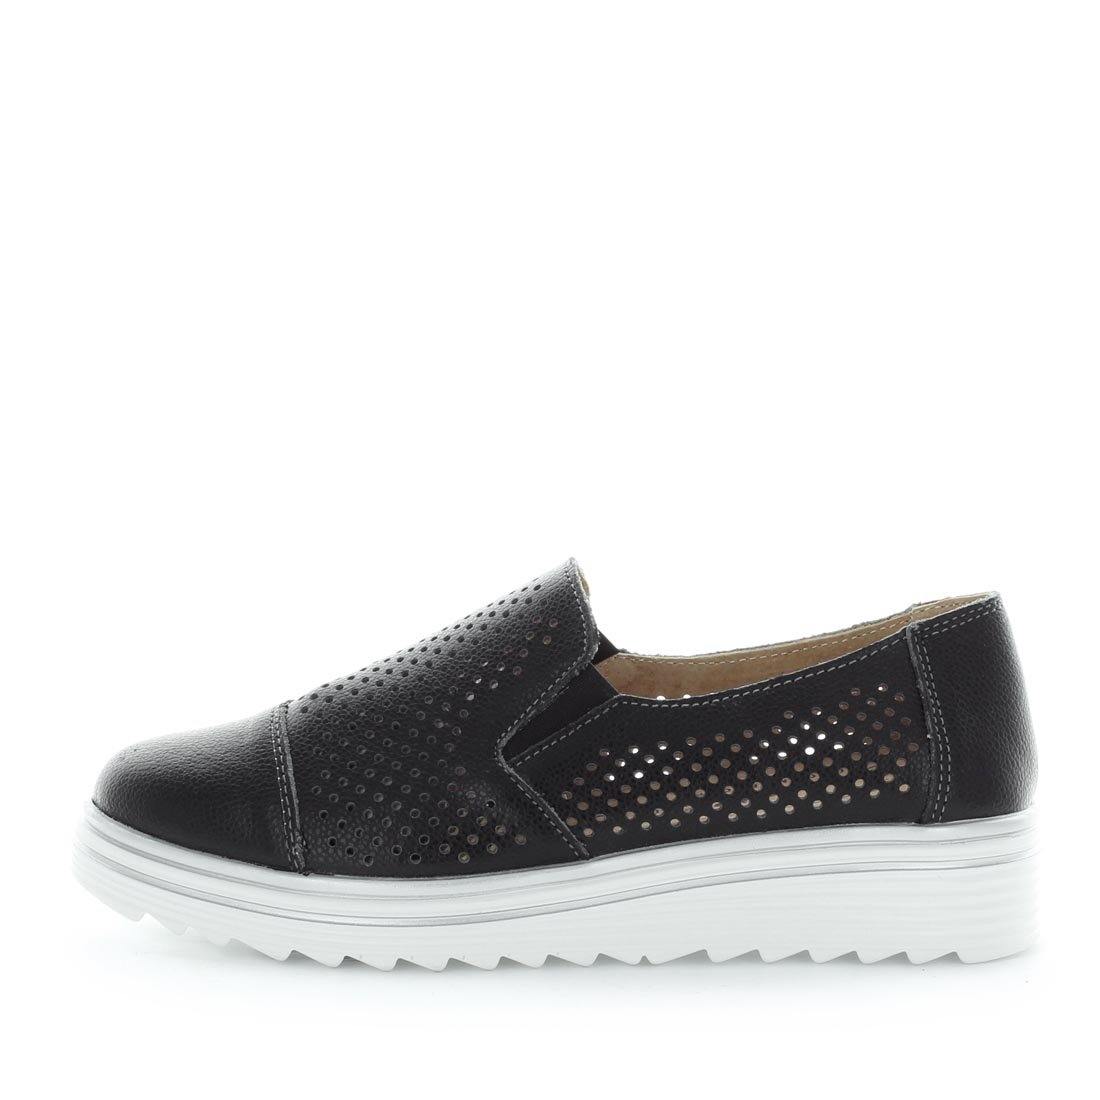 Just Bee comfort shoes - Crista by Just Bee - womens comfort shoes - flat slip-on style shoes with a laser cut upper and slight flatform wedge all wrapped in leather constructionJust Bee comfort shoes - Crista by Just Bee - womens comfort shoes - flat slip-on style shoes with a laser cut upper and slight flatform wedge all wrapped in leather construction (6538287153231)